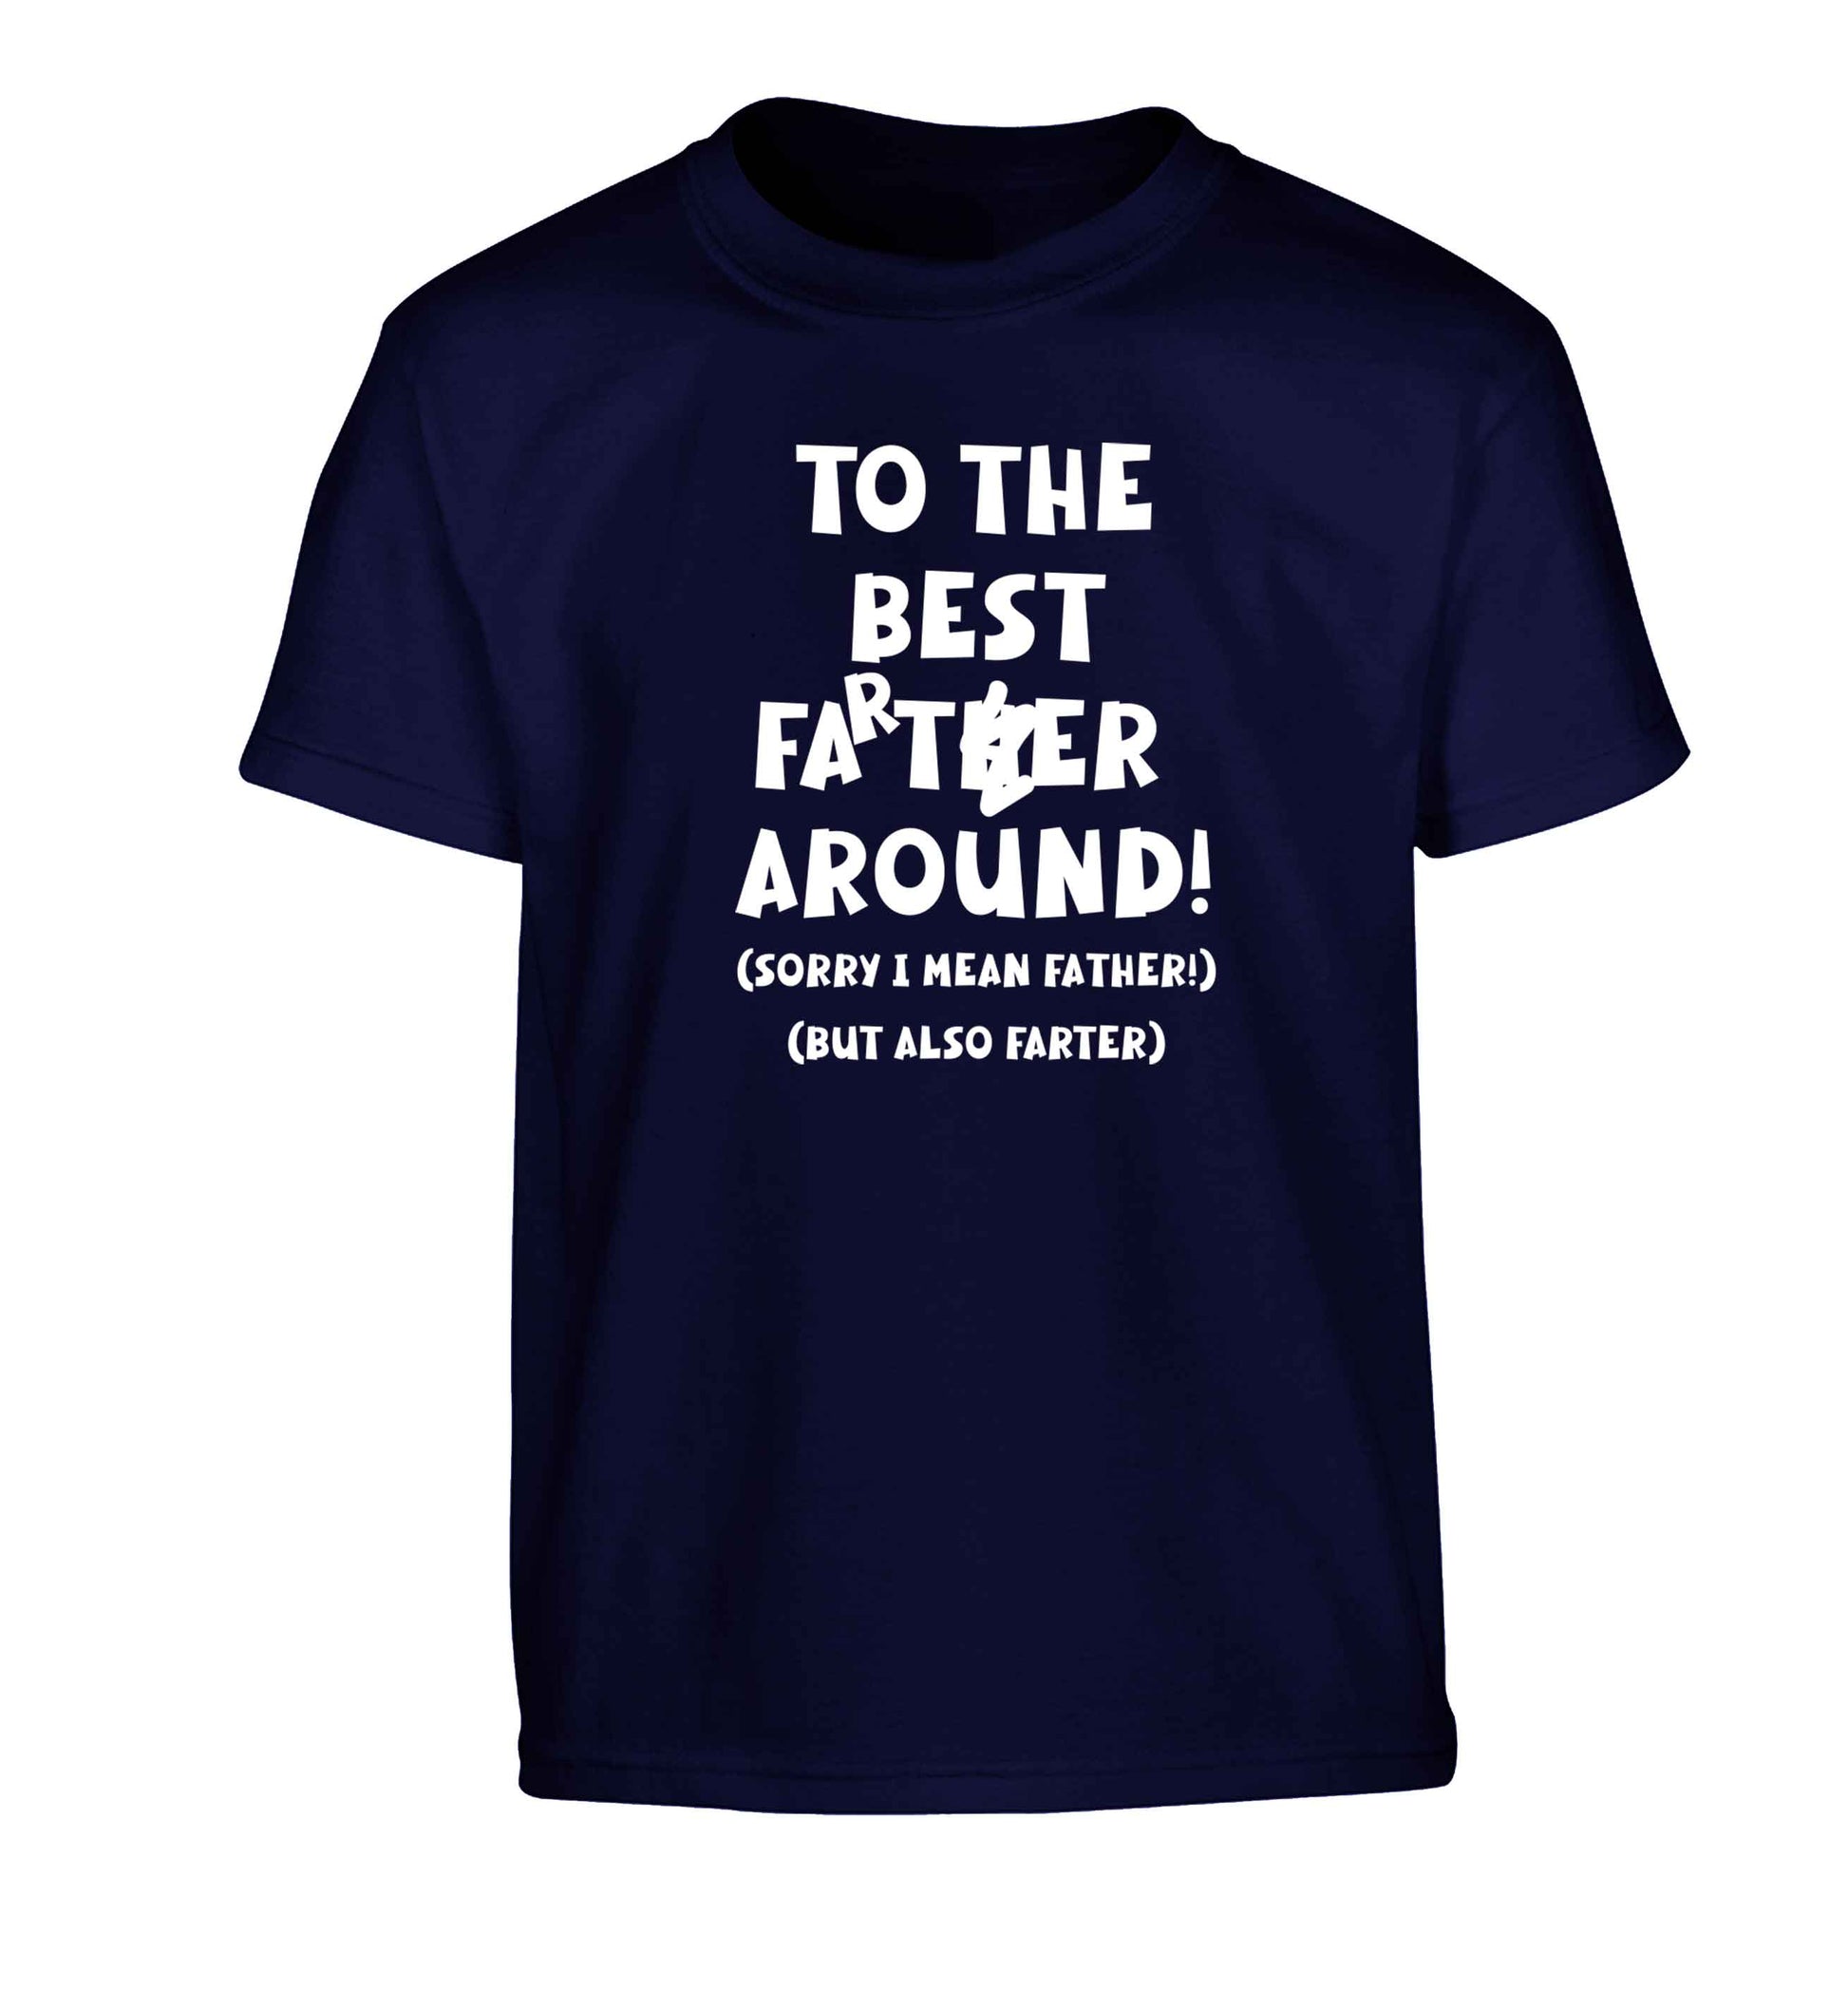 To the best farter around! Sorry I mean father, but also farter Children's navy Tshirt 12-13 Years